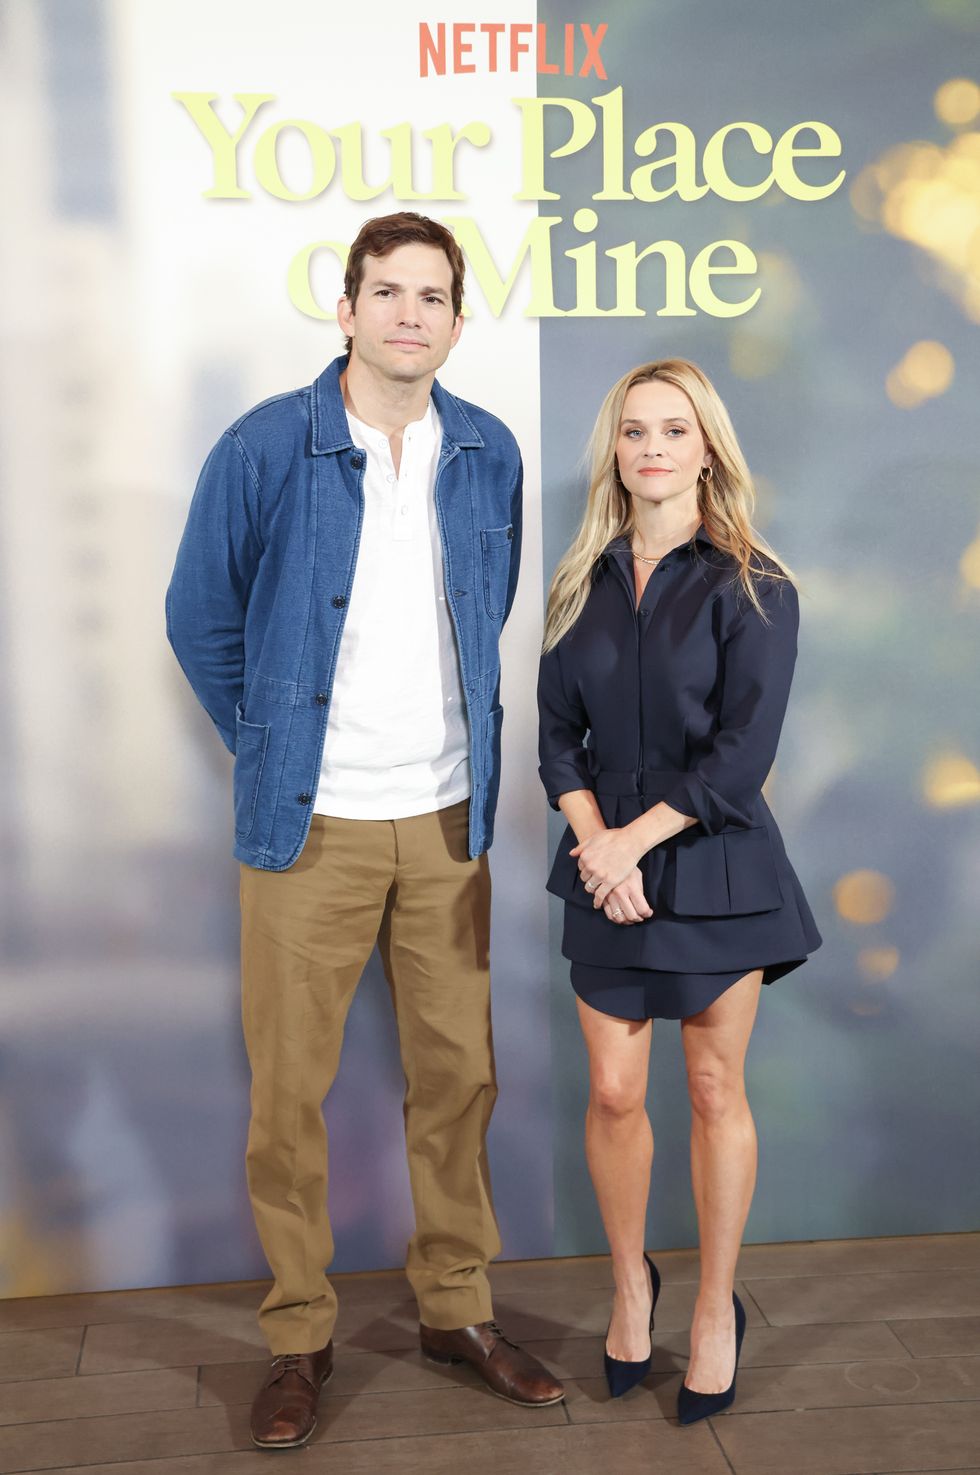 ashton kutcher and reese witherspoon at the photocall for netflix's "your place or mine"